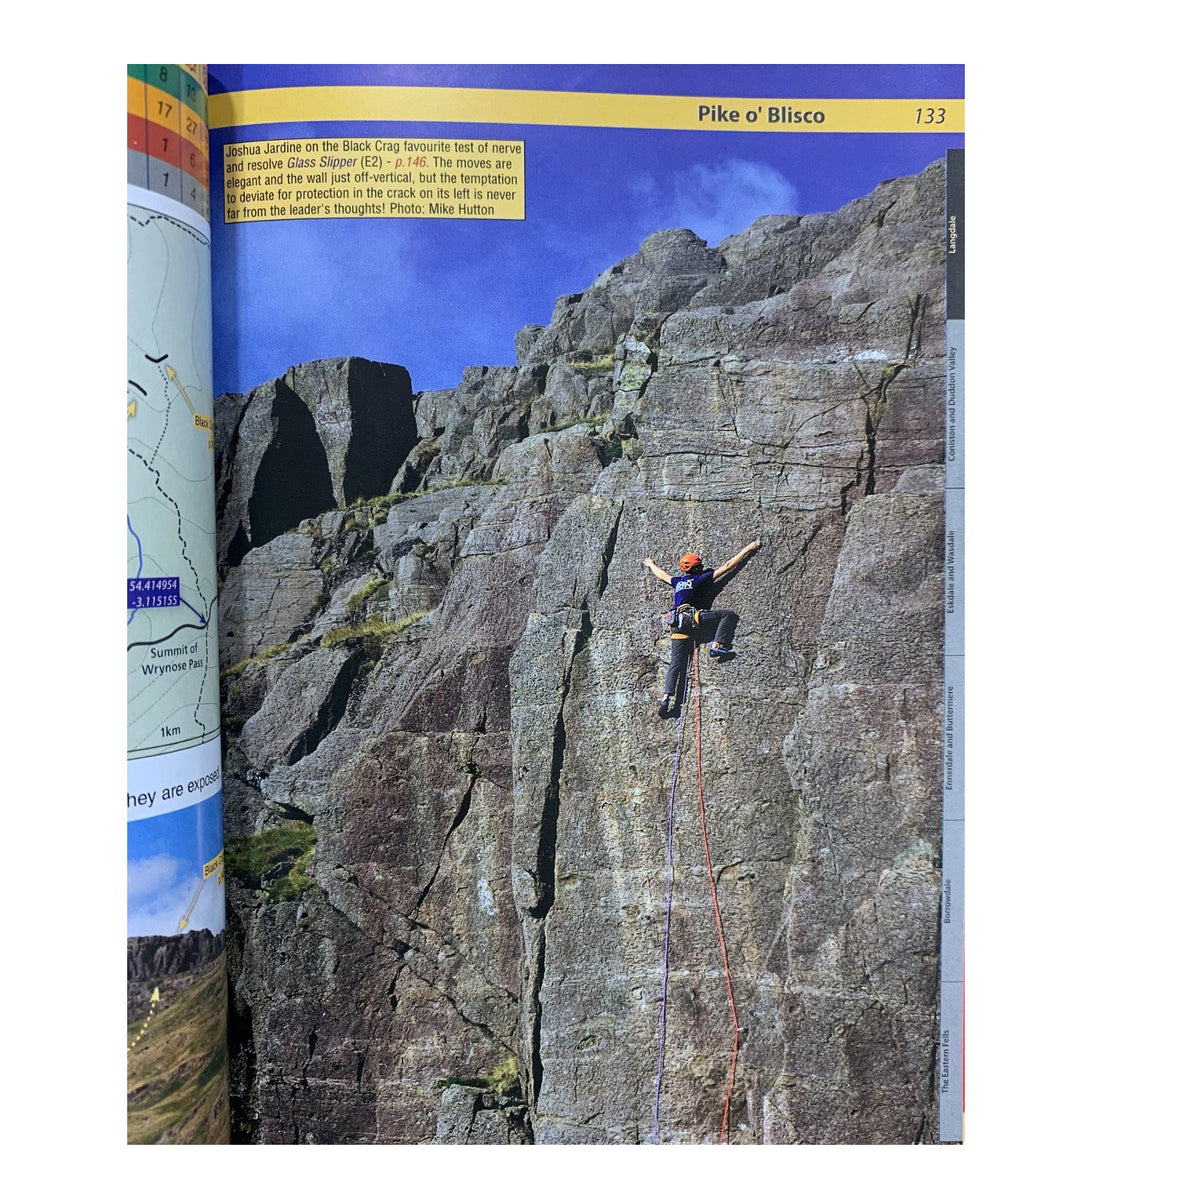 Lake District Climbs Inside page showing Joshua Jardine, climber on route